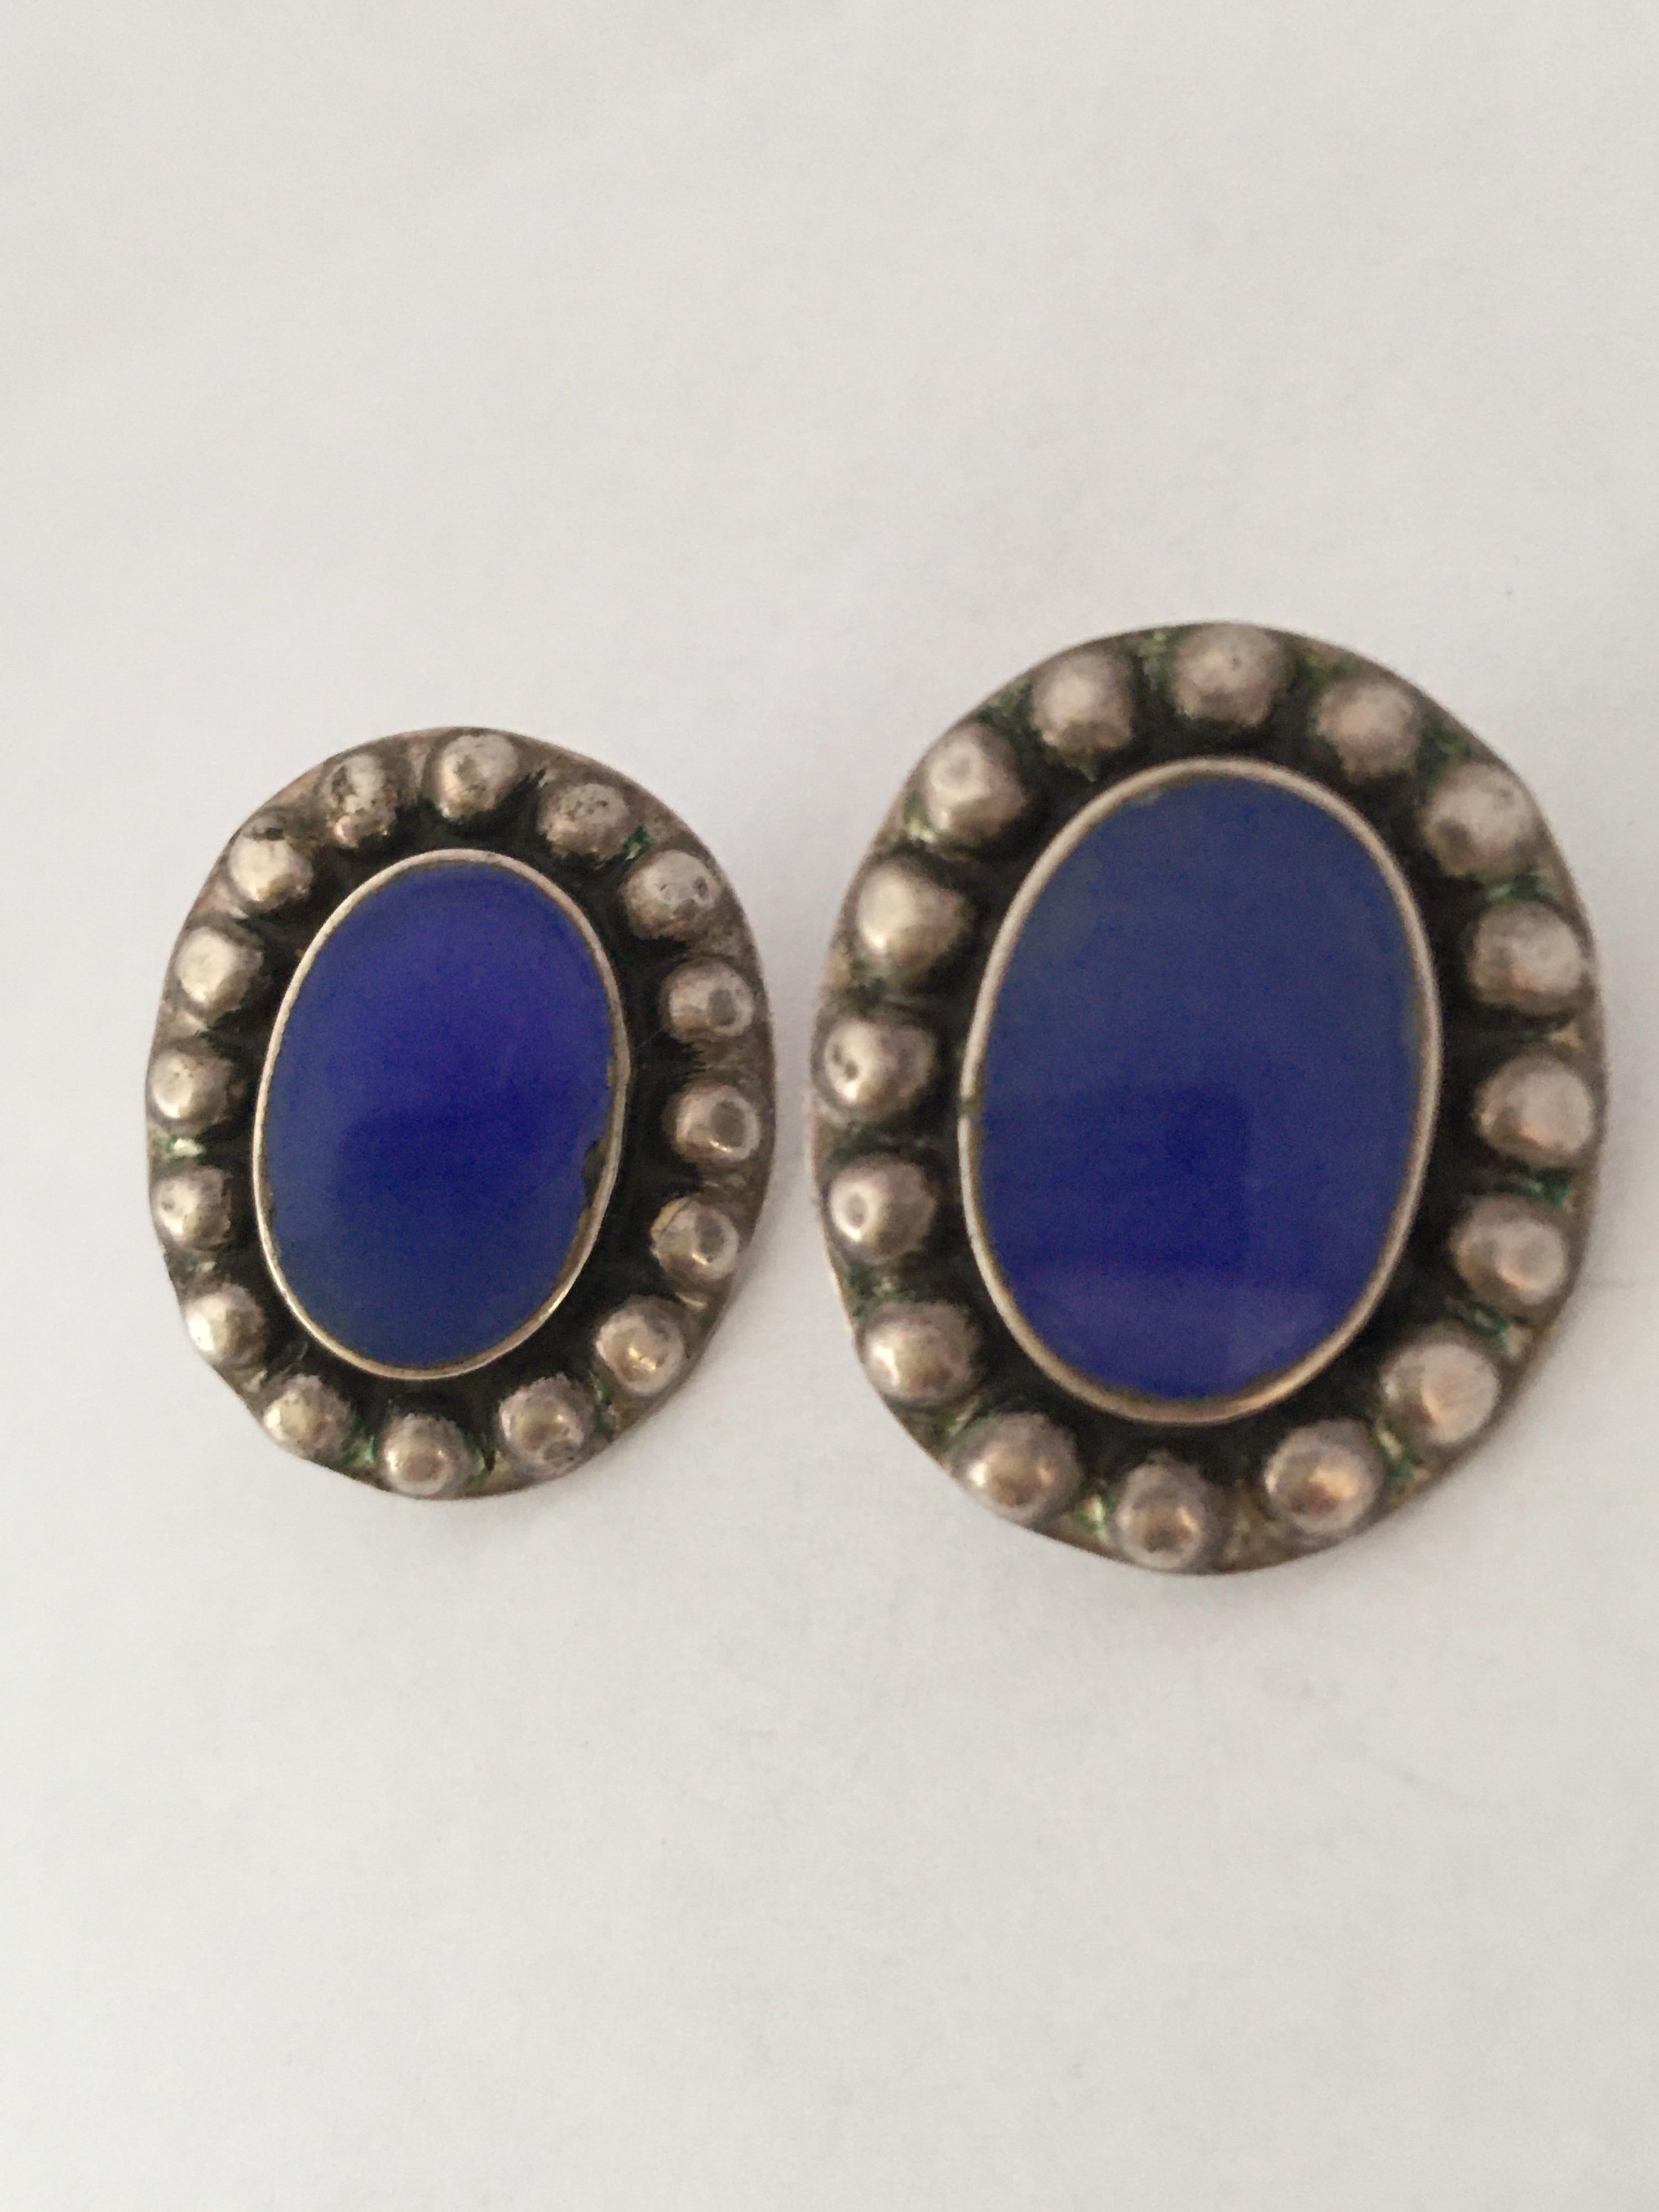 Vintage 925 Silver Pair of Earrings with Blue Agate For Sale 2